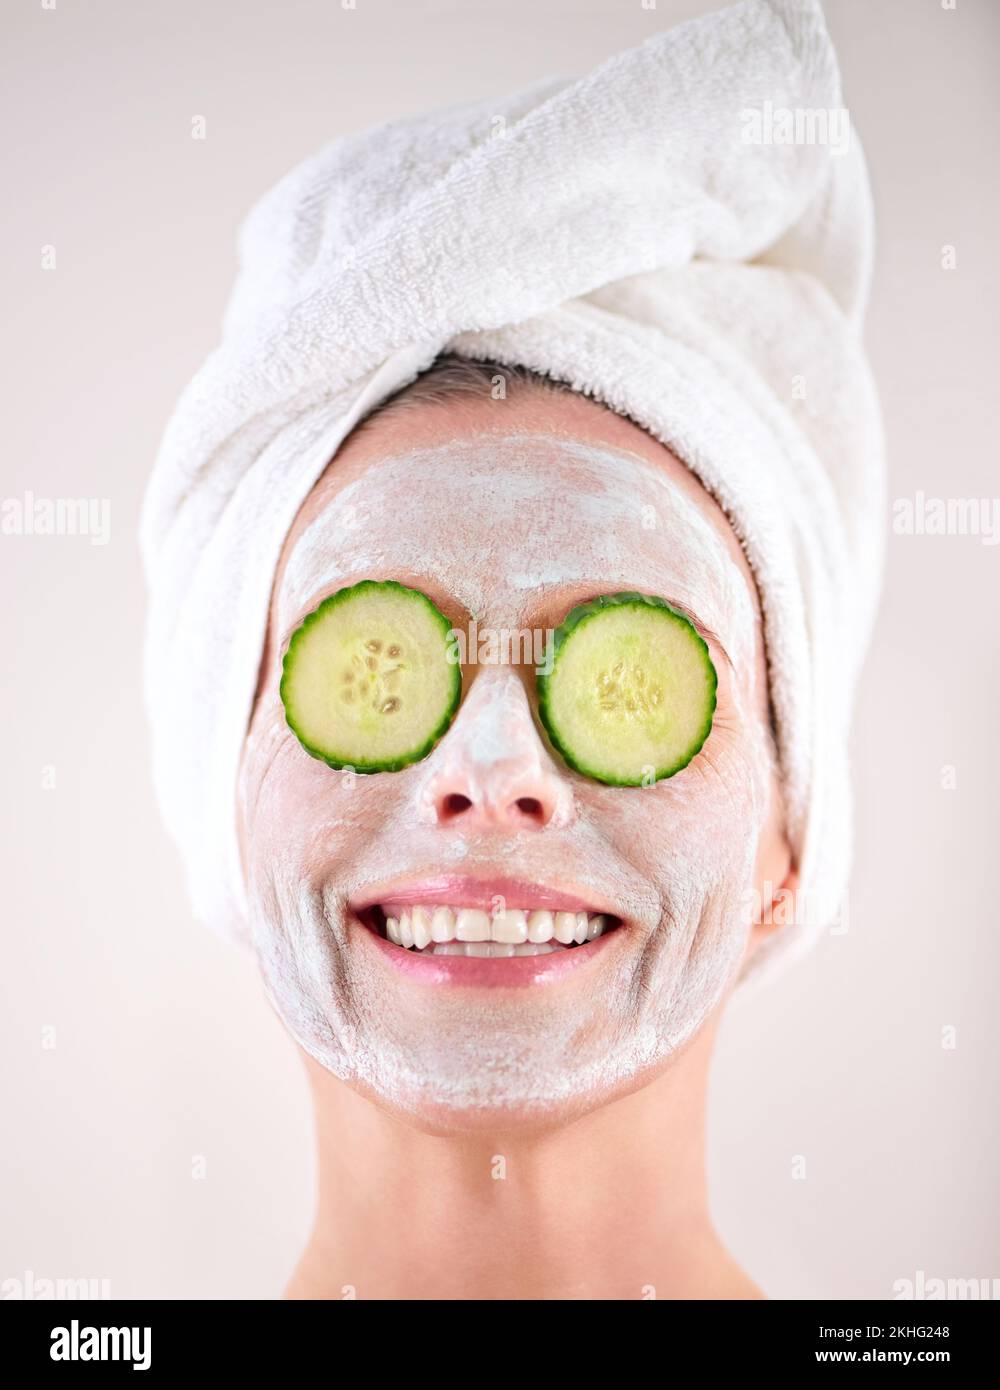 Make your skin happy. a mature woman with a mask applied to her face and cucumber slices on her eyes. Stock Photo